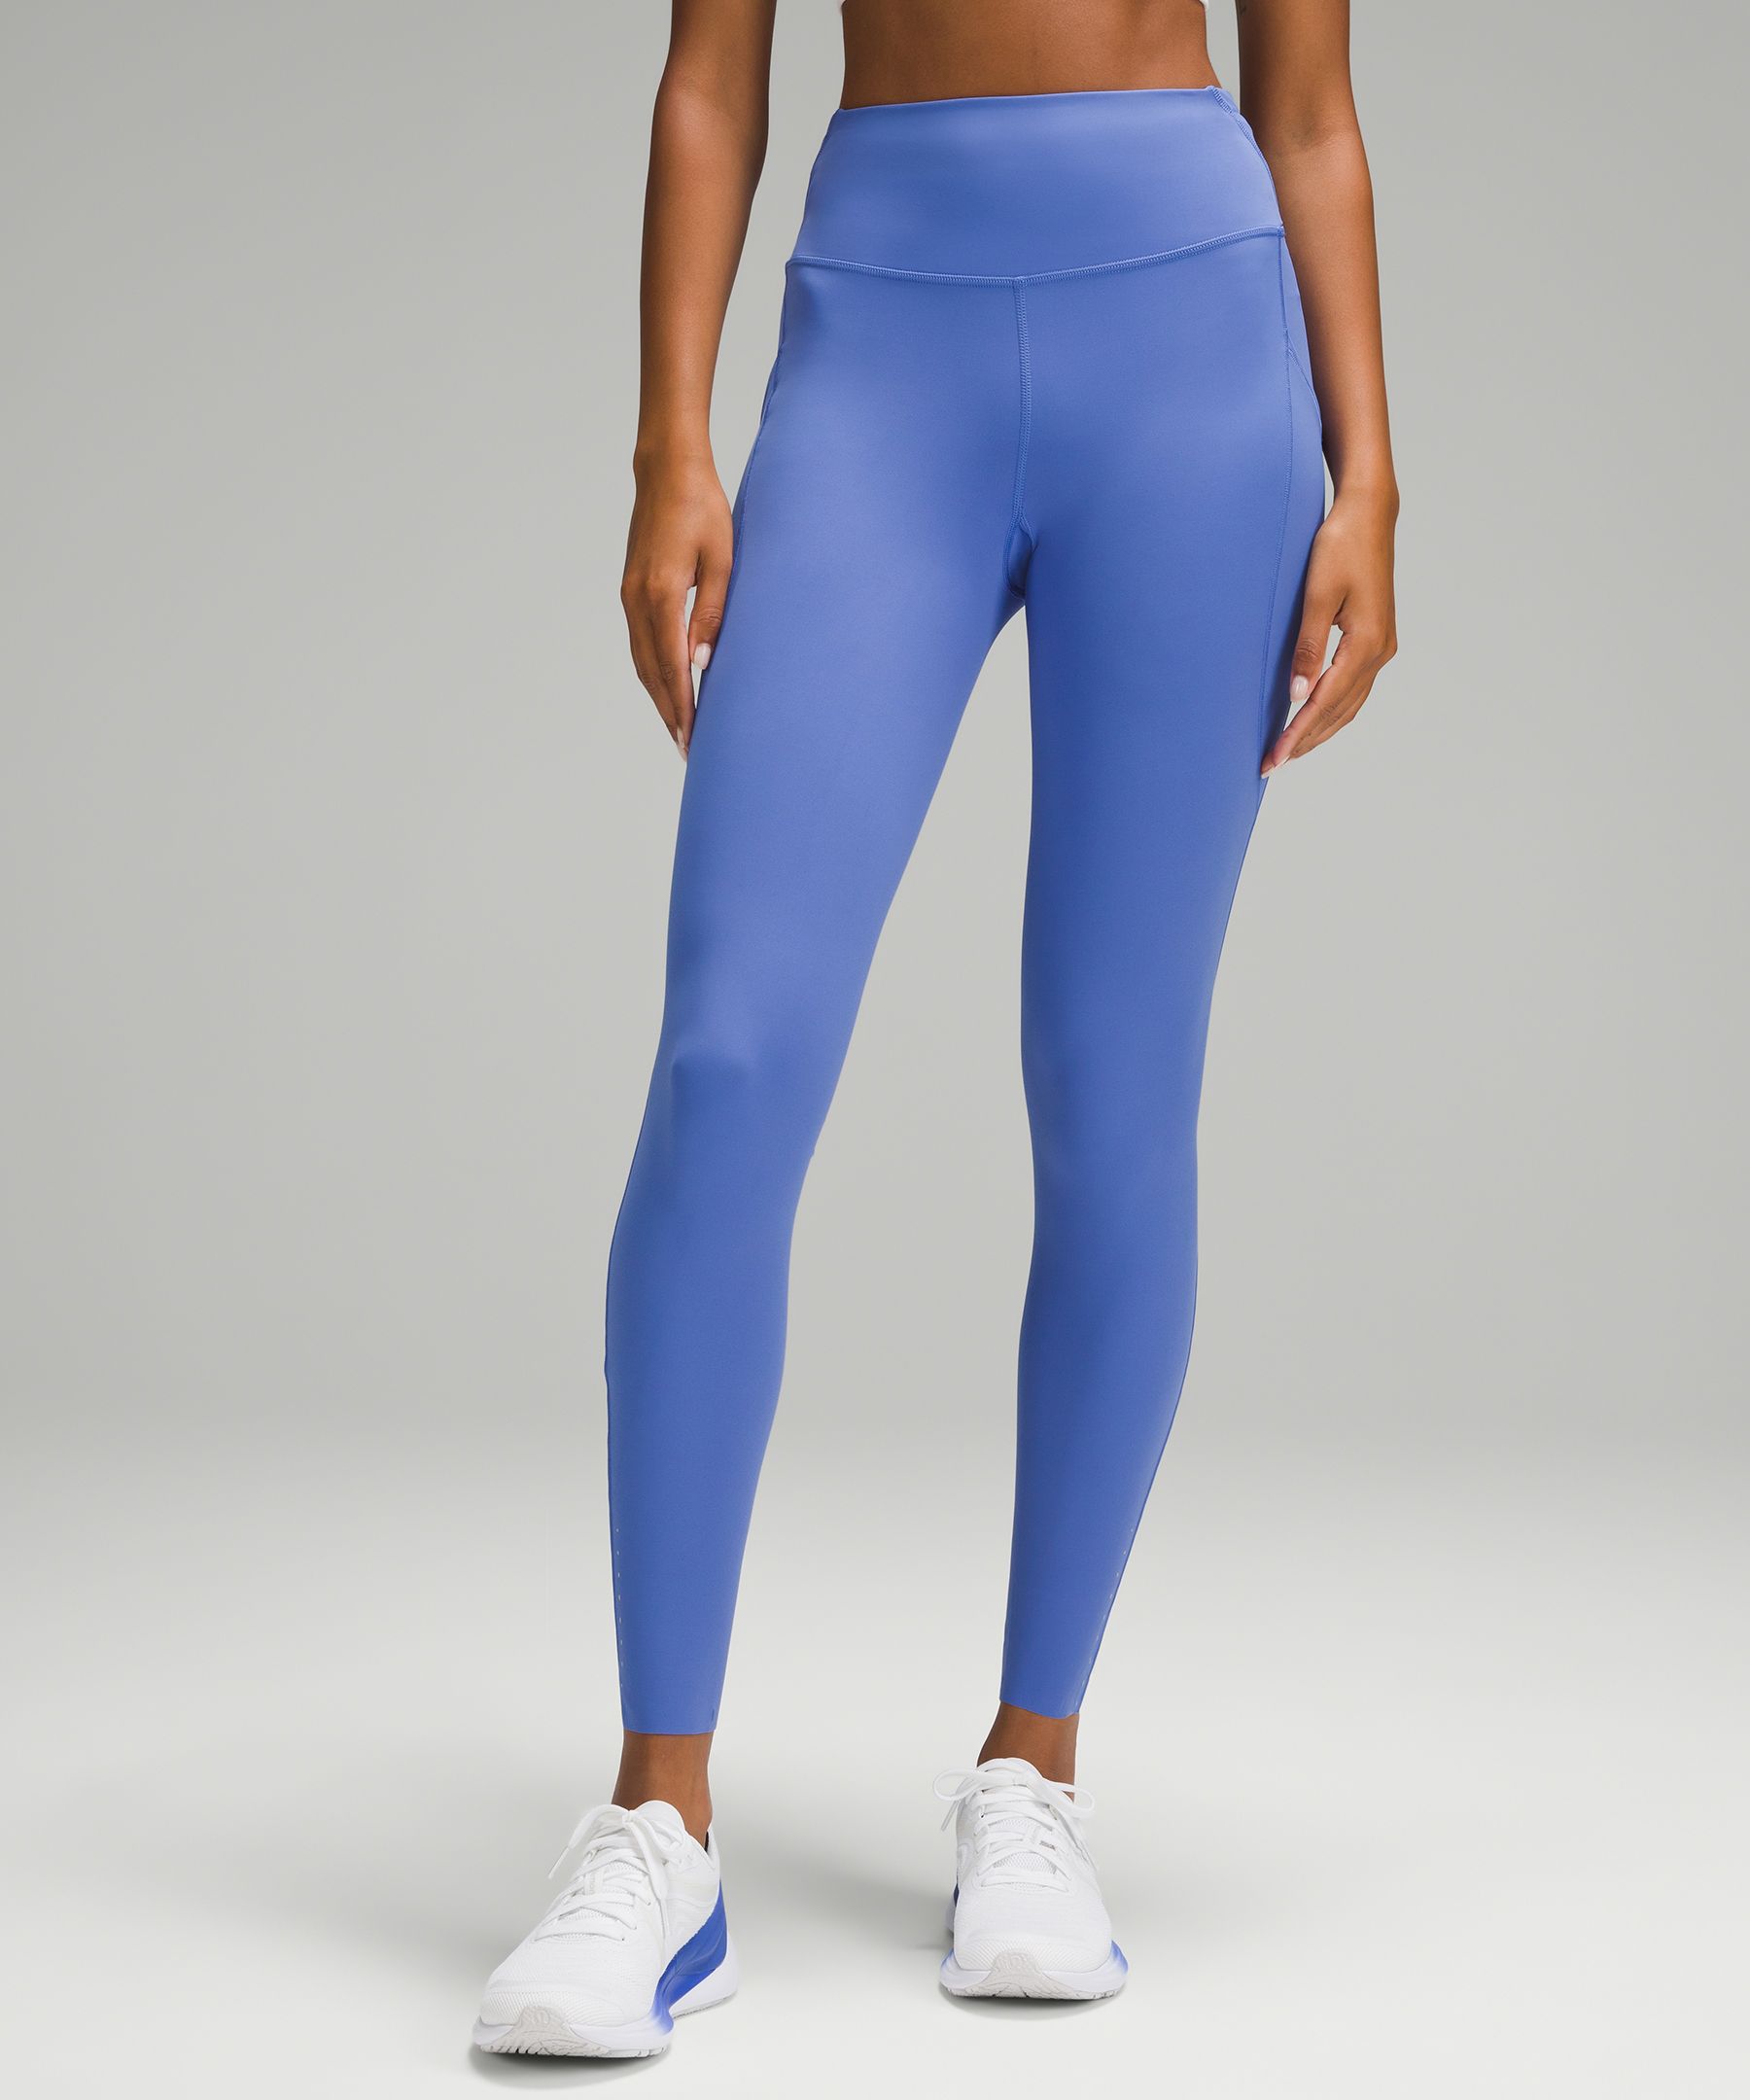 Lululemon Fast and Free High-Rise Tight 28” Pockets